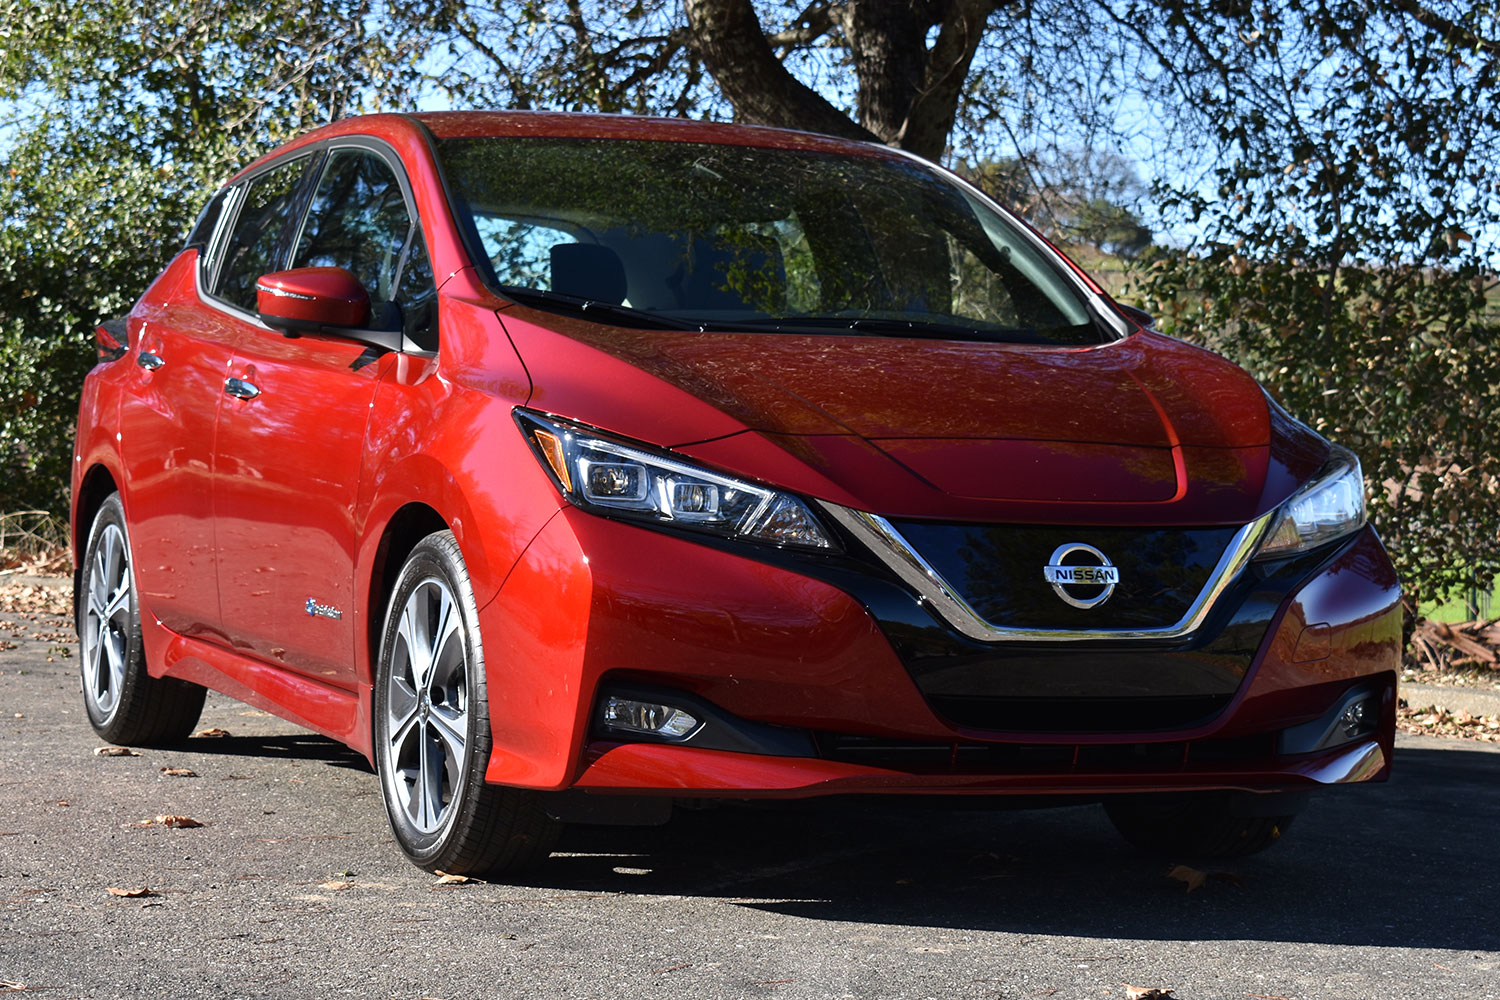 2018 Nissan Leaf First Drive Review | Digital Trends